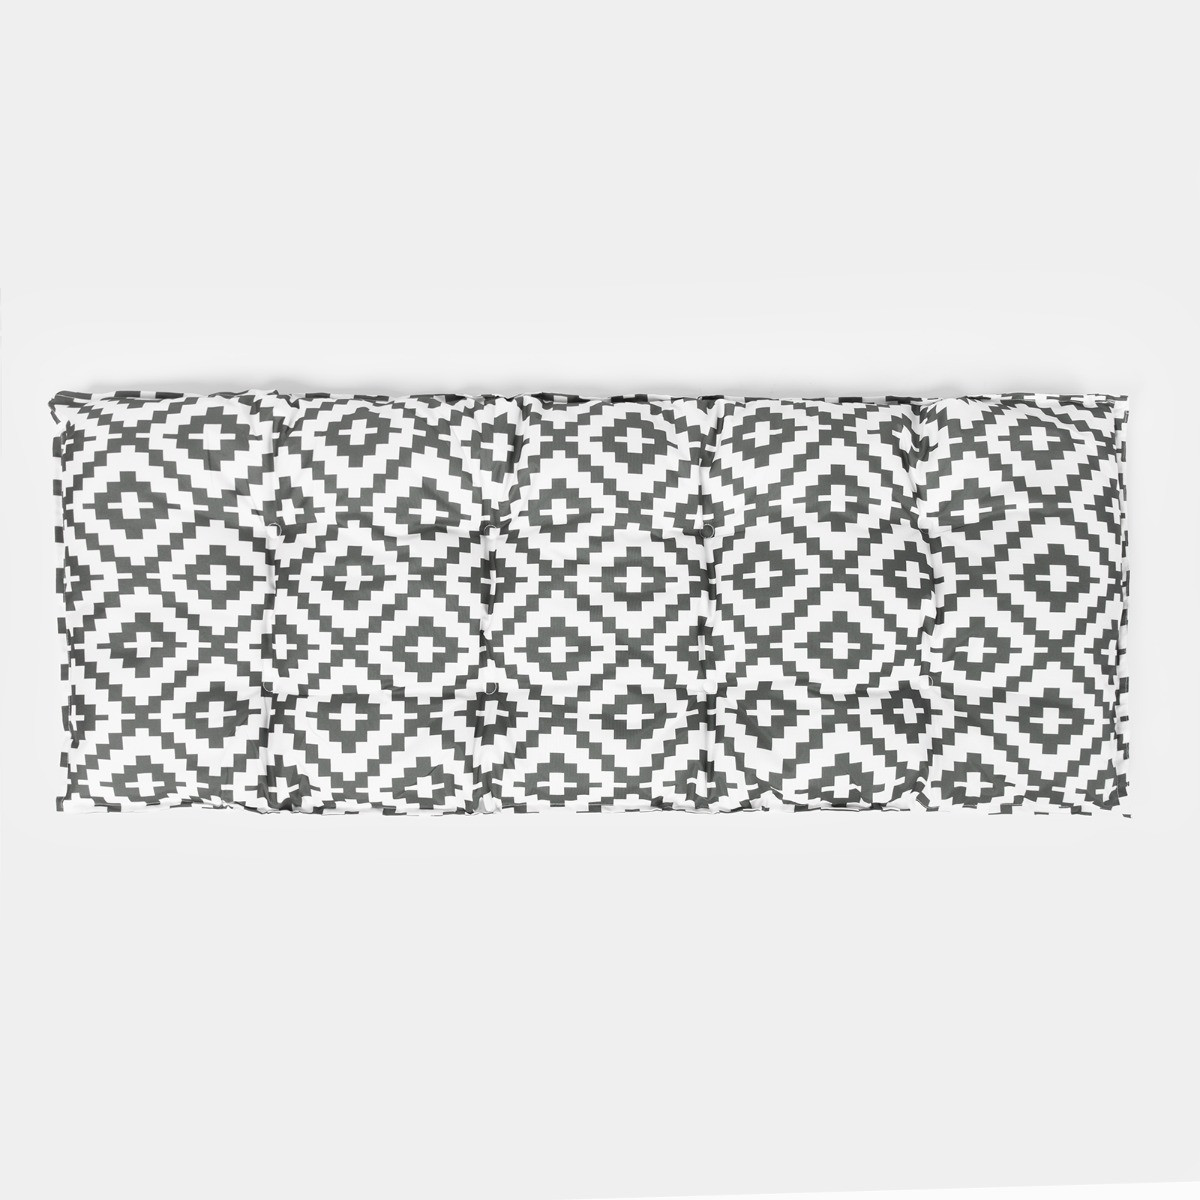 OHS 2 Seater Geo Print Water Resistant Bench Pad, 110cm x 40cm - Black/White>